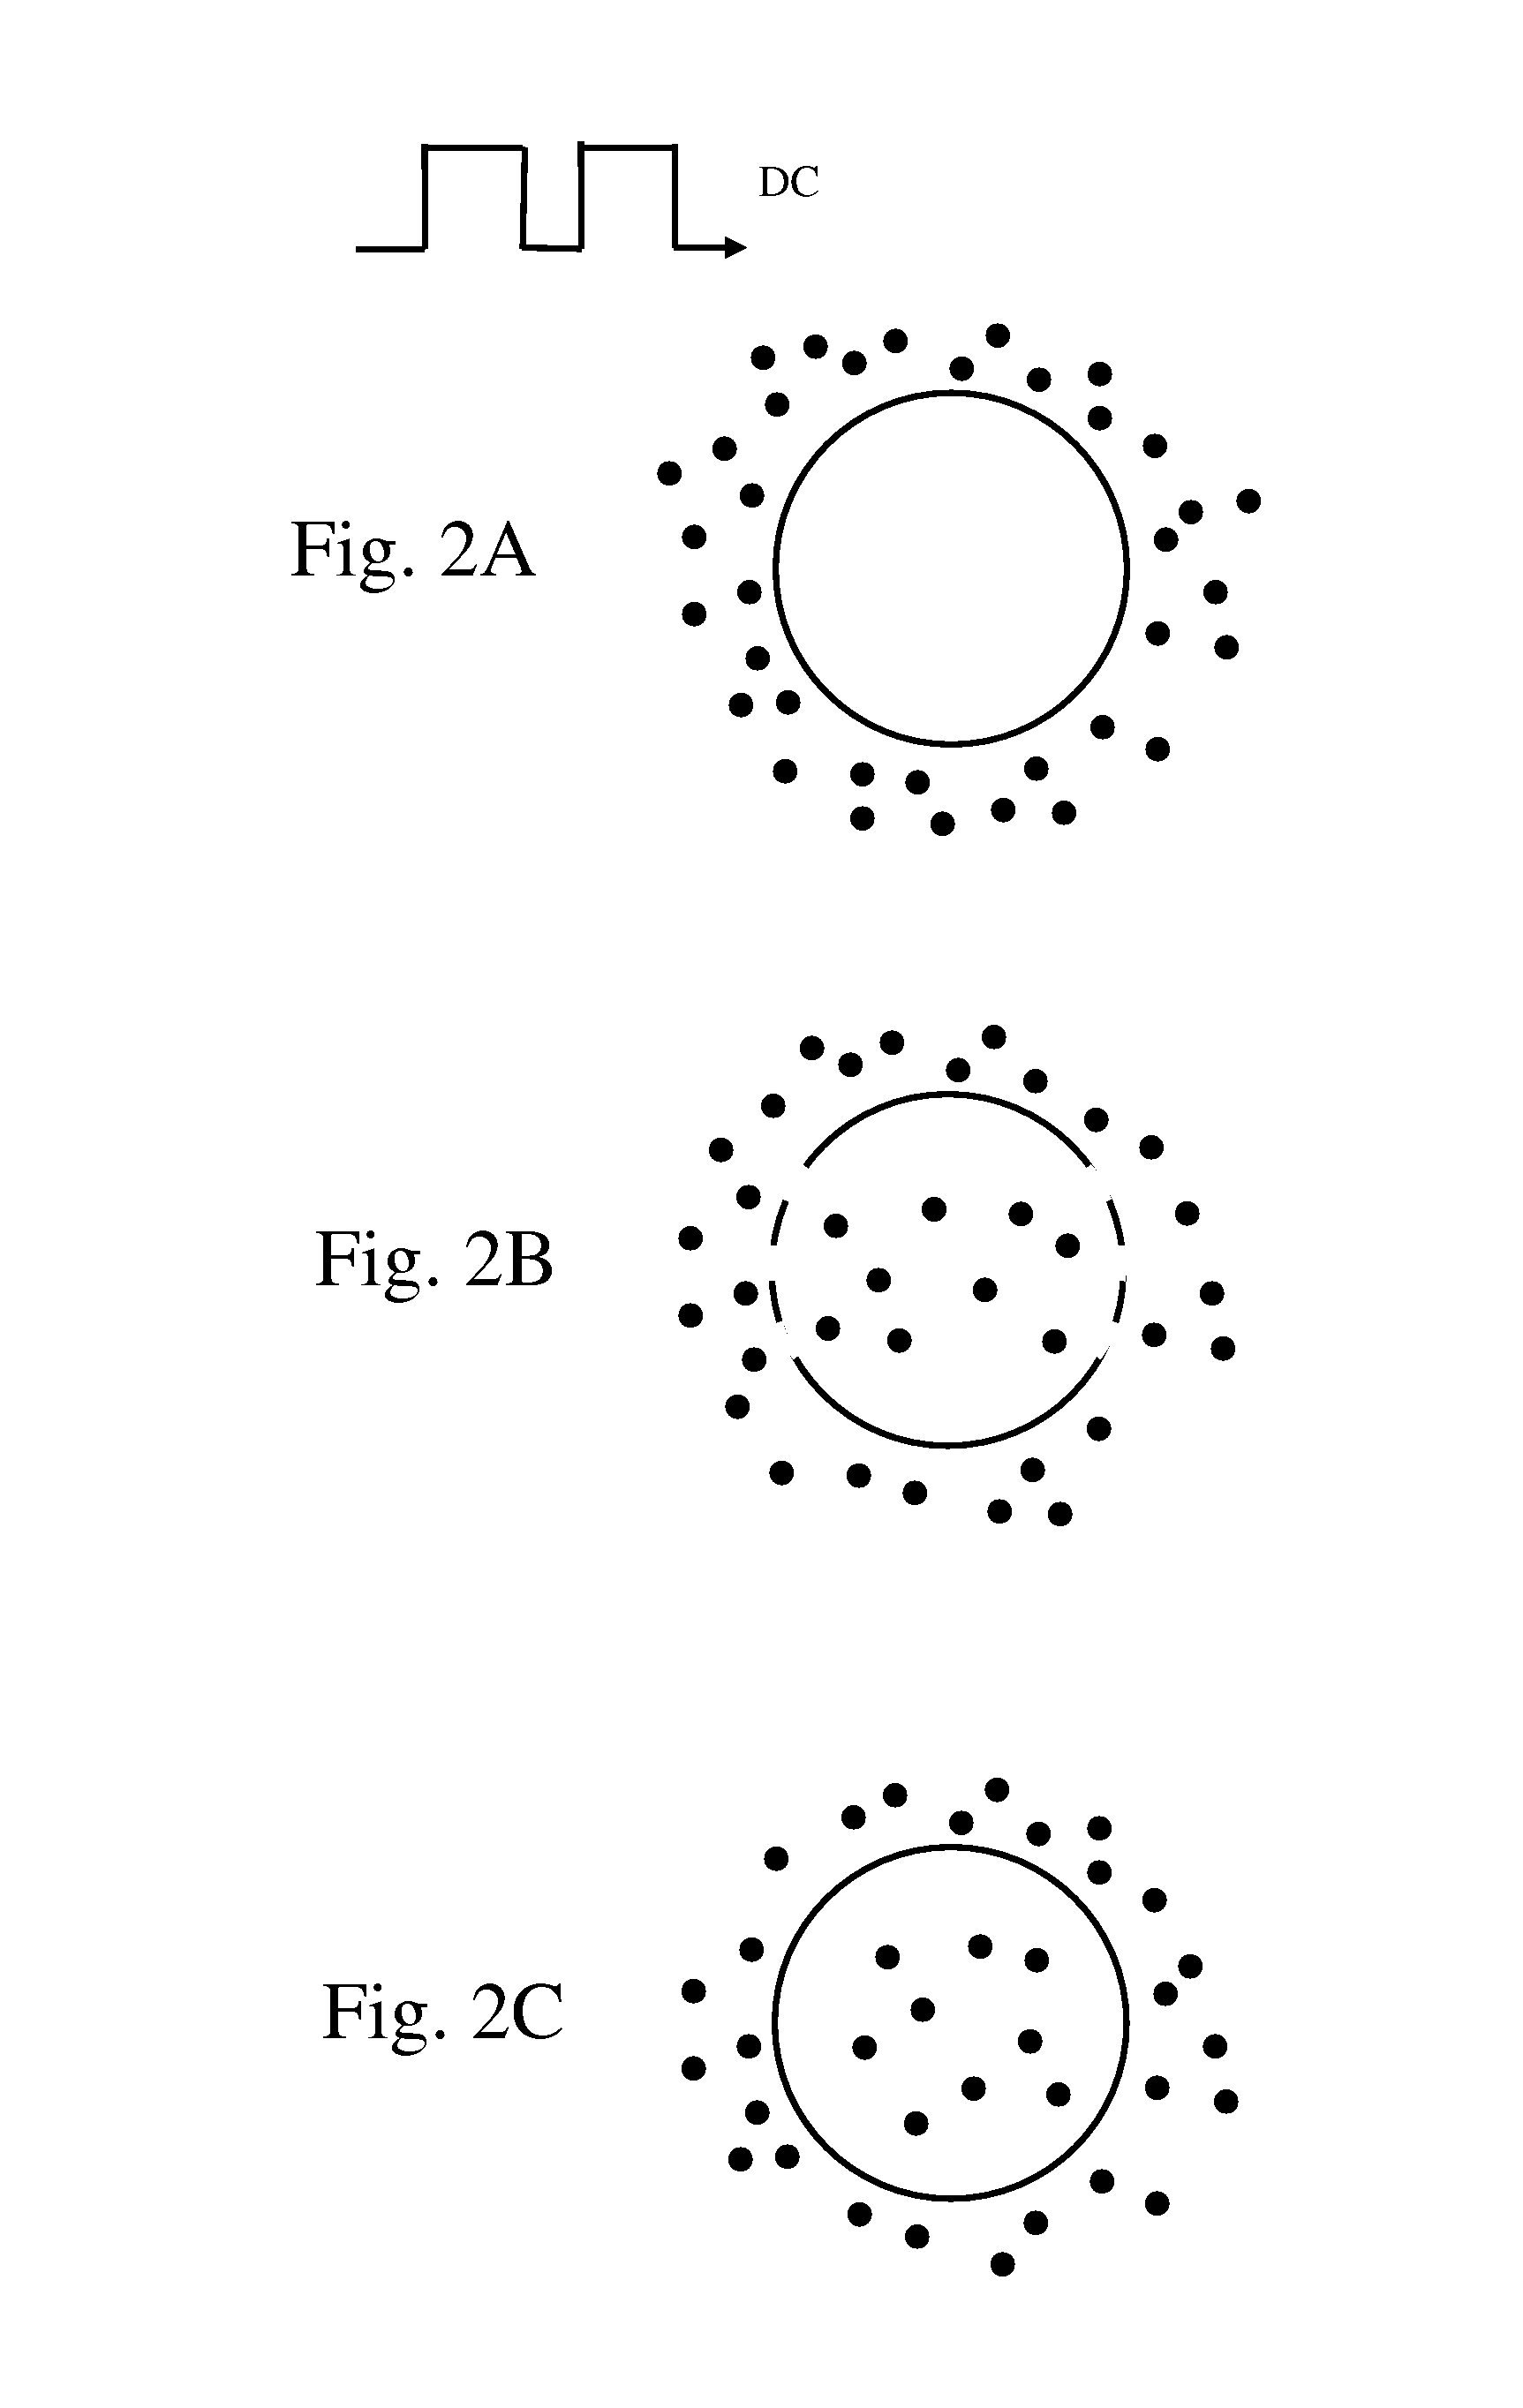 Electroporation and Electrophoresis System and Method for Achieving Molecular Penetration into Cells In Vivo